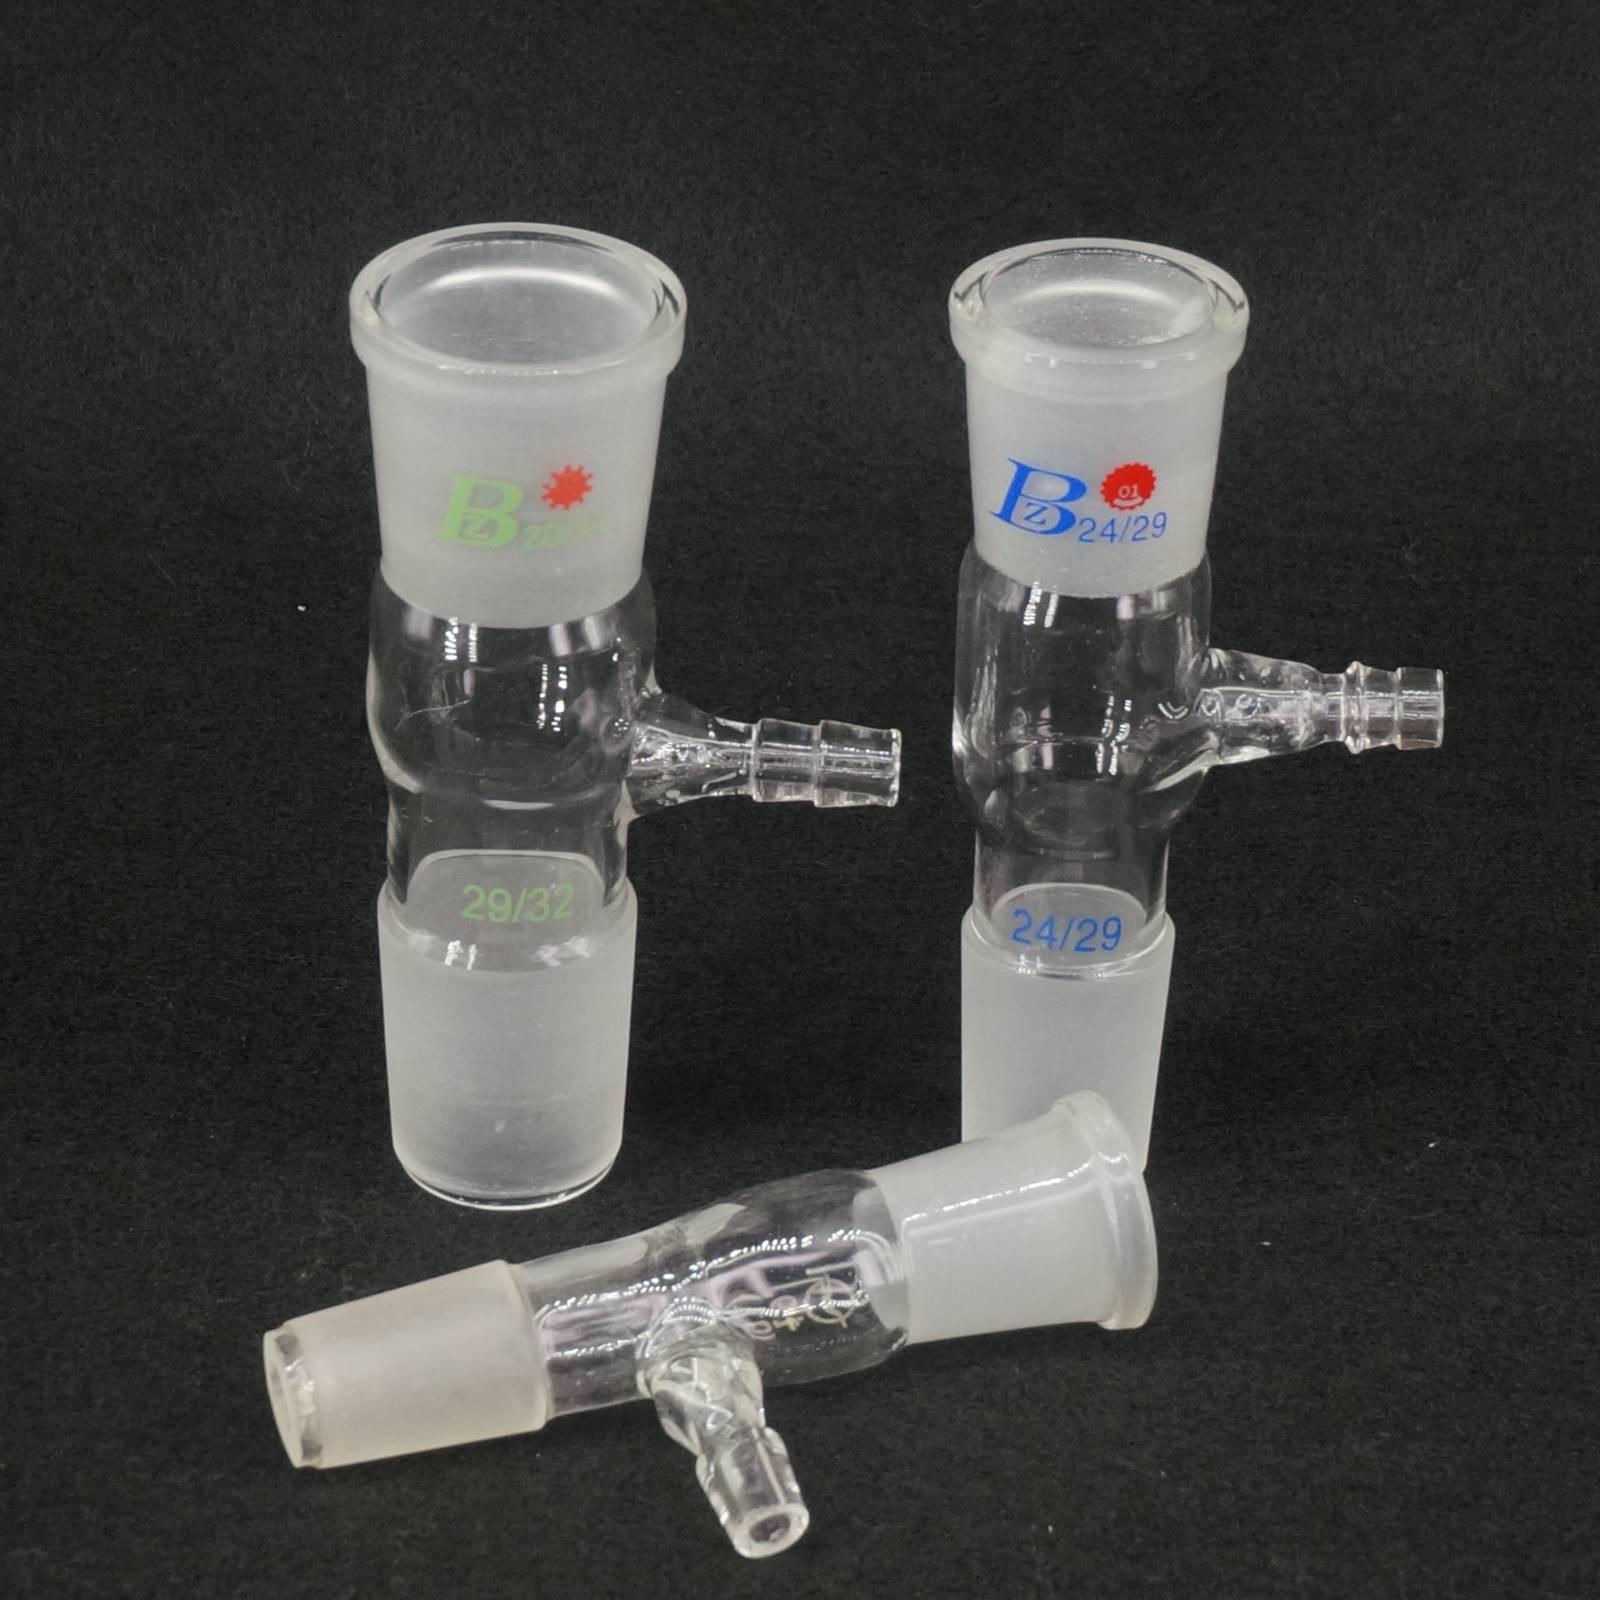 14 23 19 26 24 29 29 32 Ground Joint Female To Male Laborotary Borosilicate Glass 4